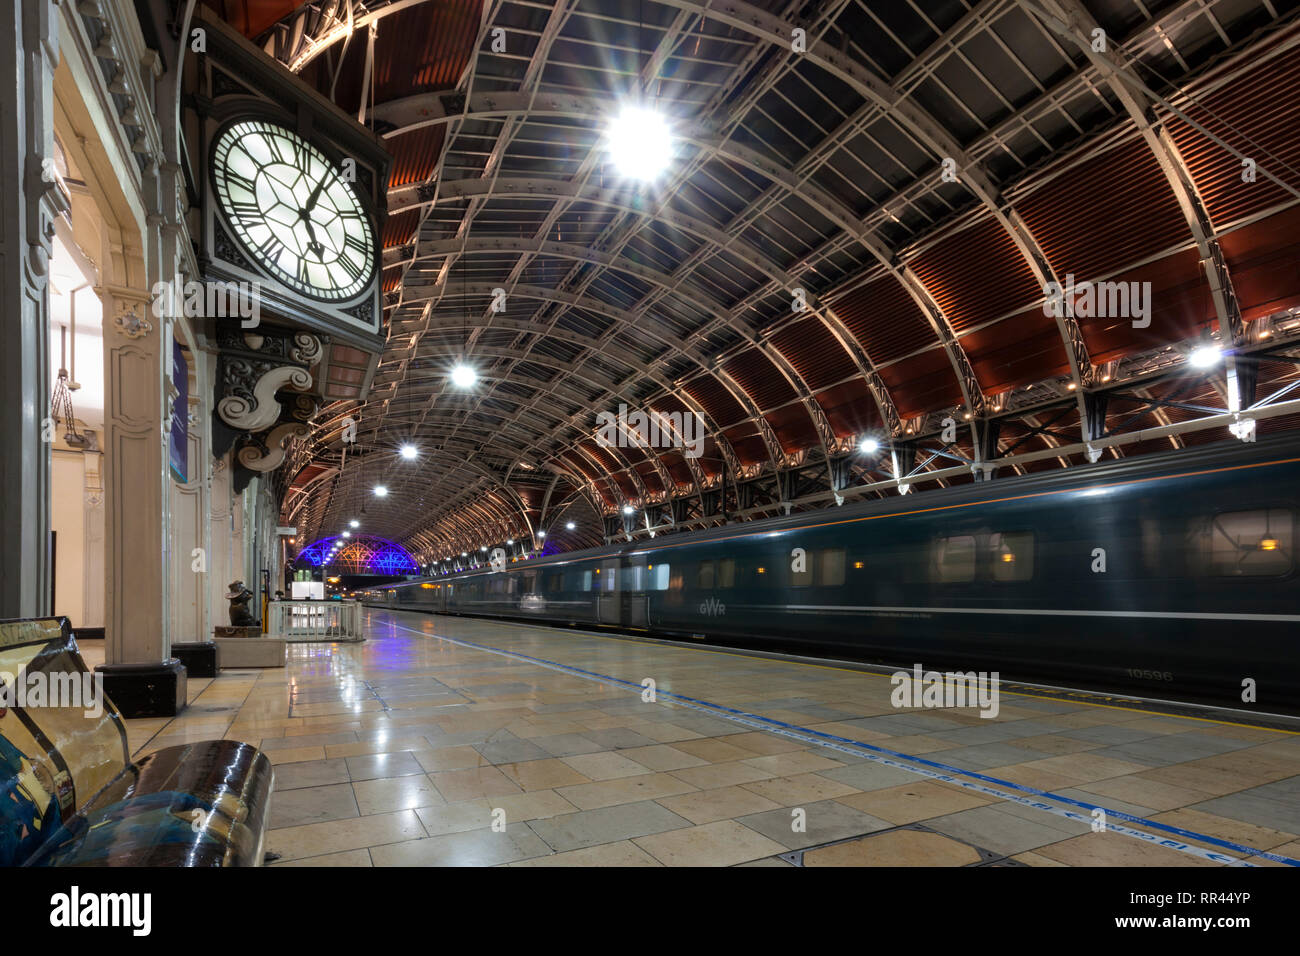 The  First Great Western night Riviera sleeper train from Penzance arriving at London Paddington Station with the station clock just after 5AM Stock Photo